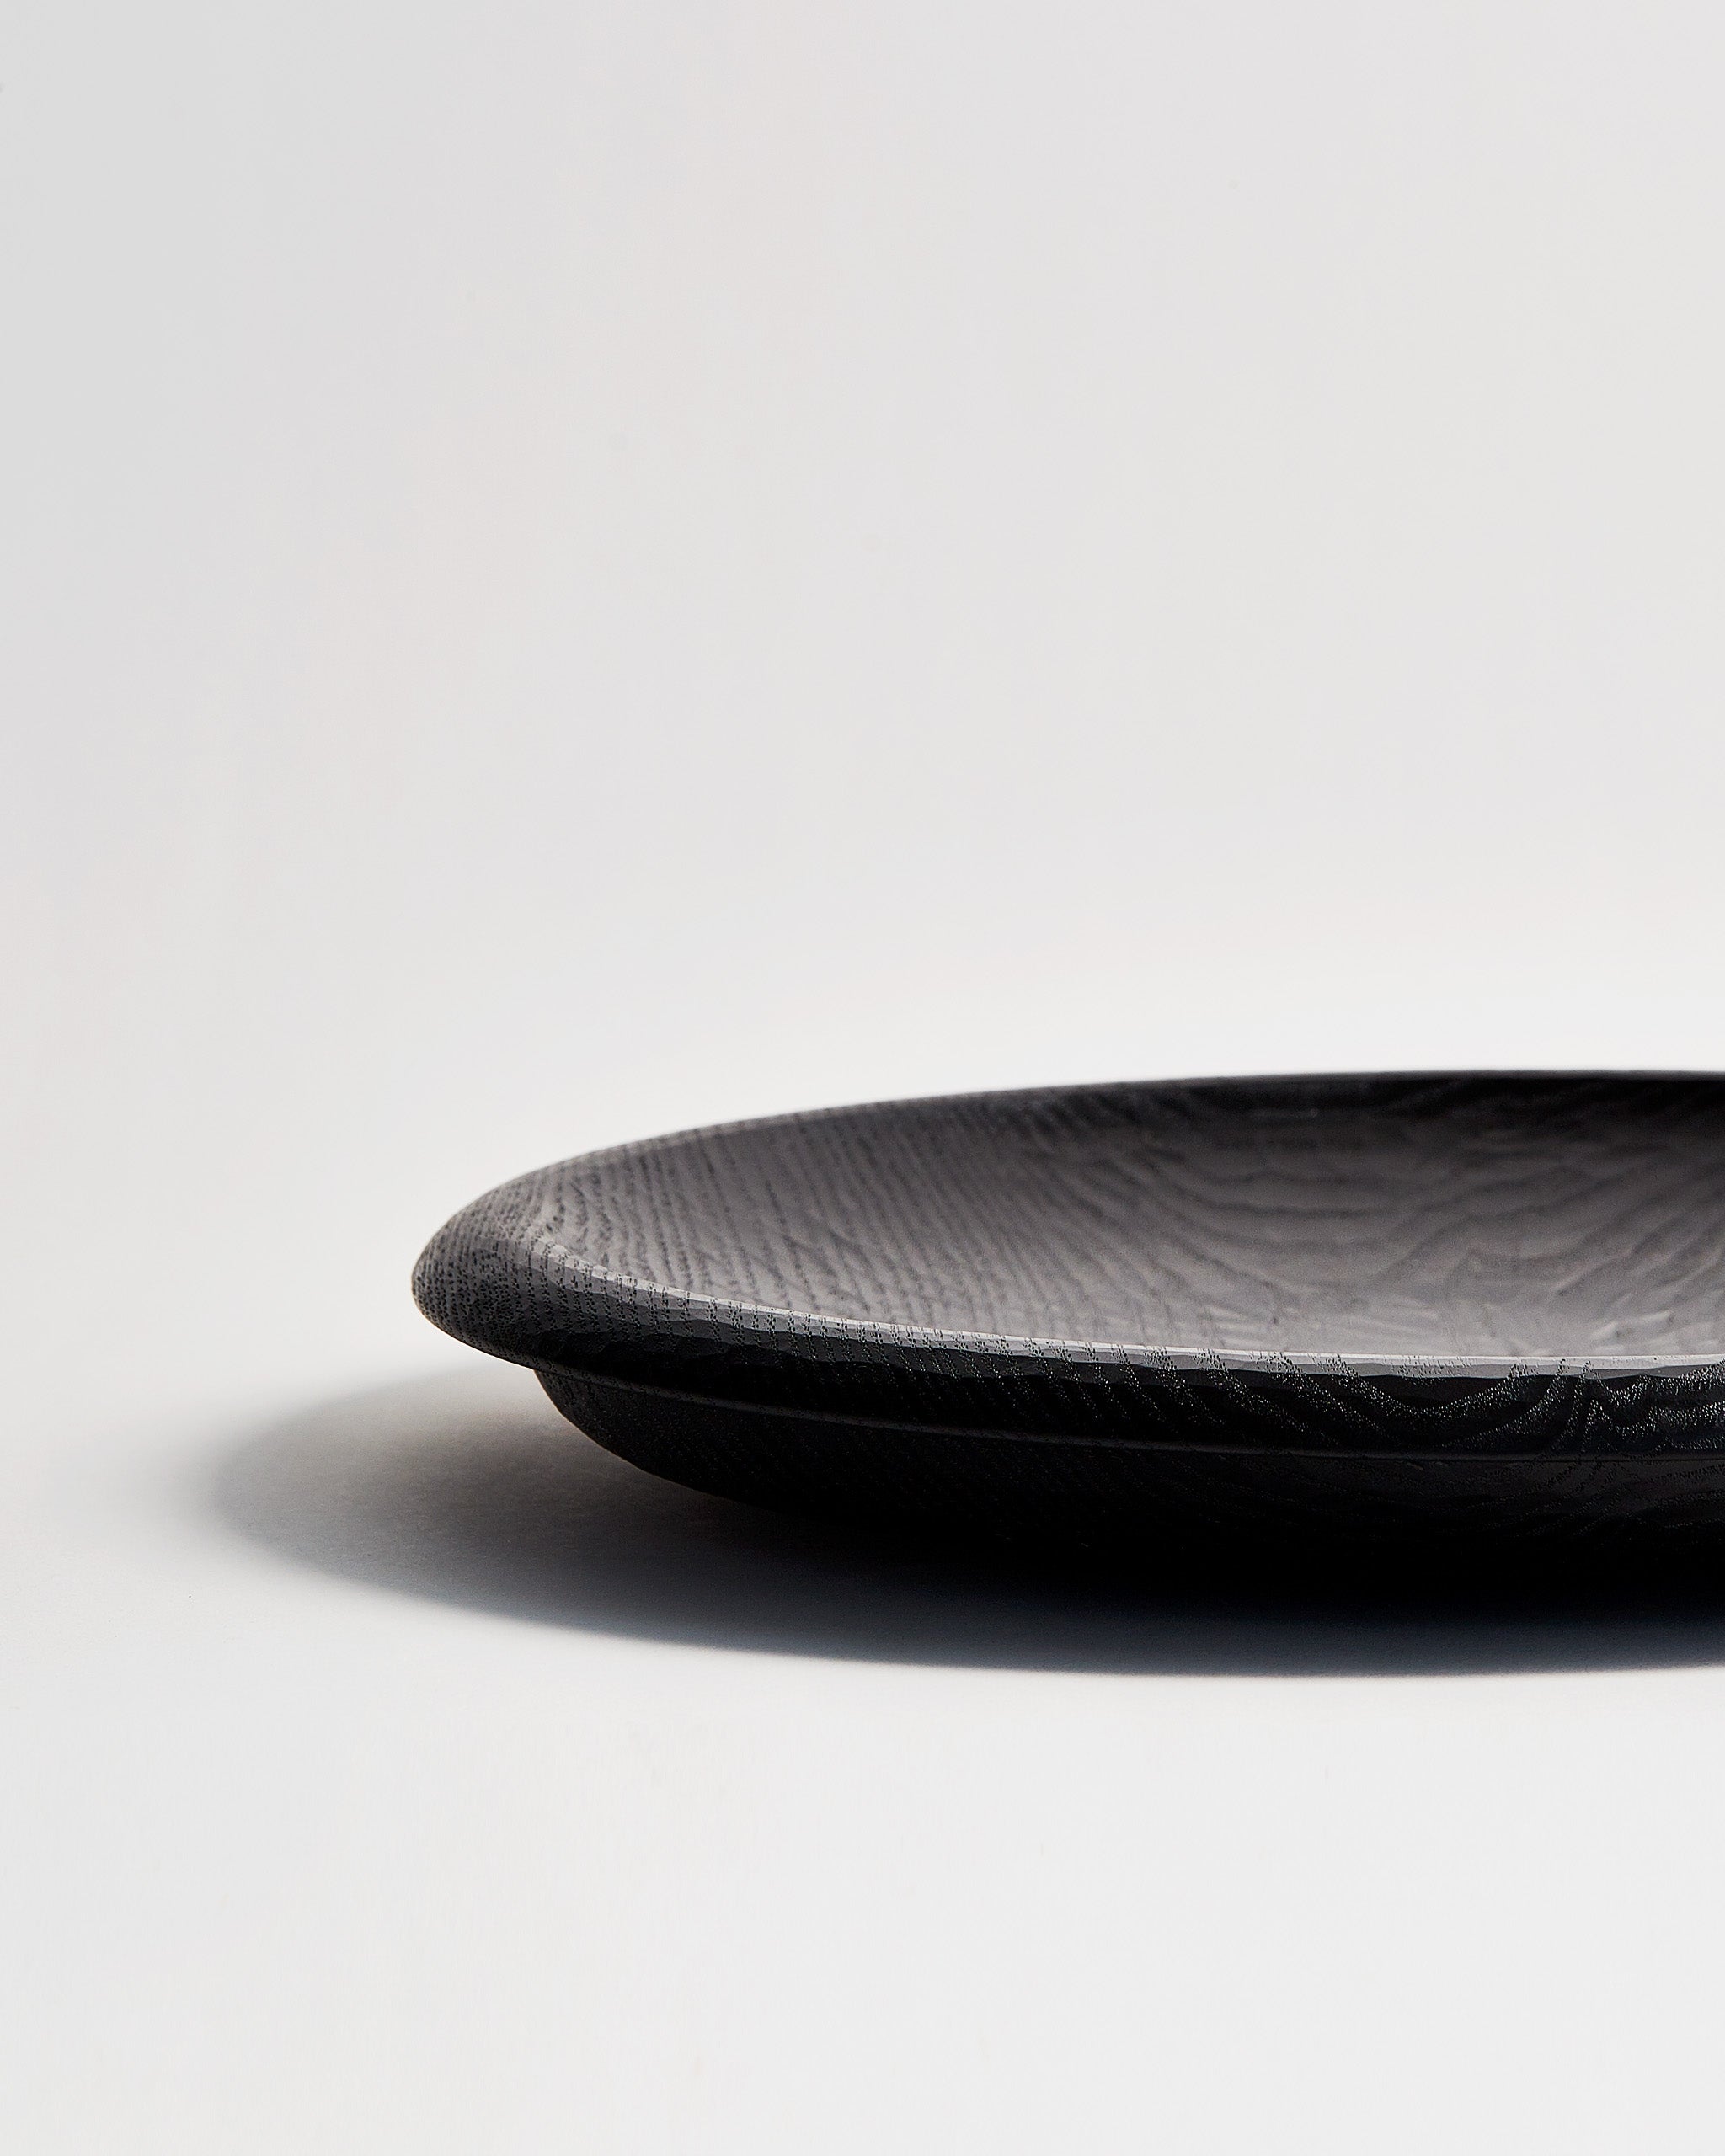 Cropped view of Noir Round Curved Rim Platter by Ryuji Mitani against white-gray background. 